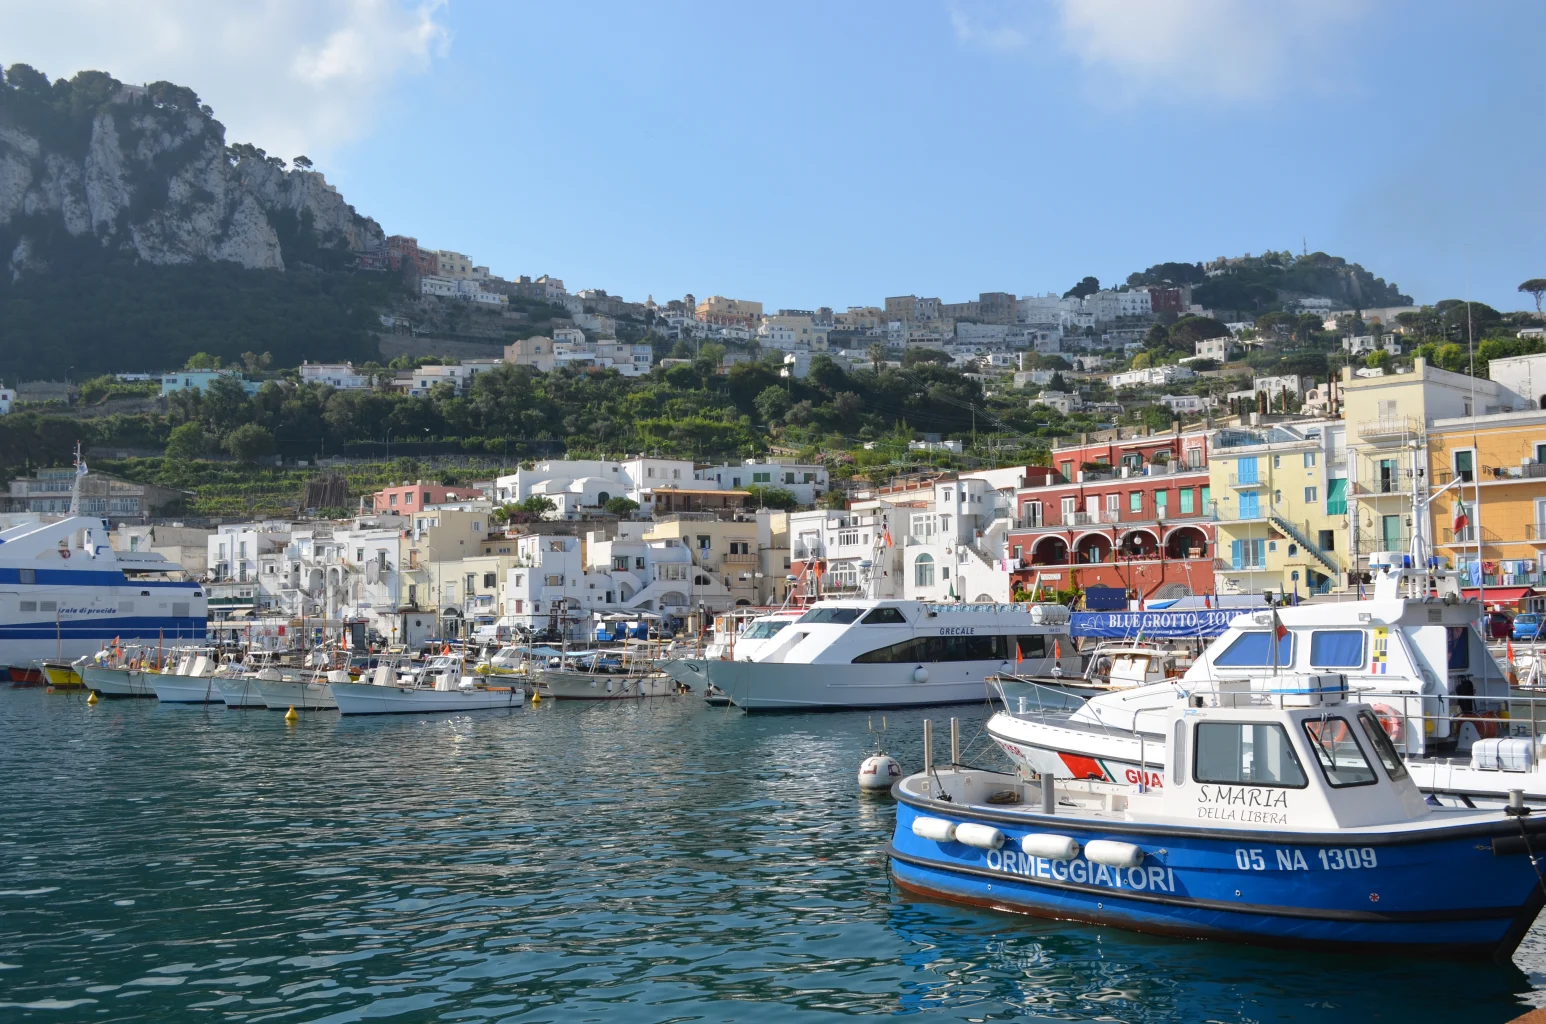 Boats and colorful buildings on the coast of Italy.